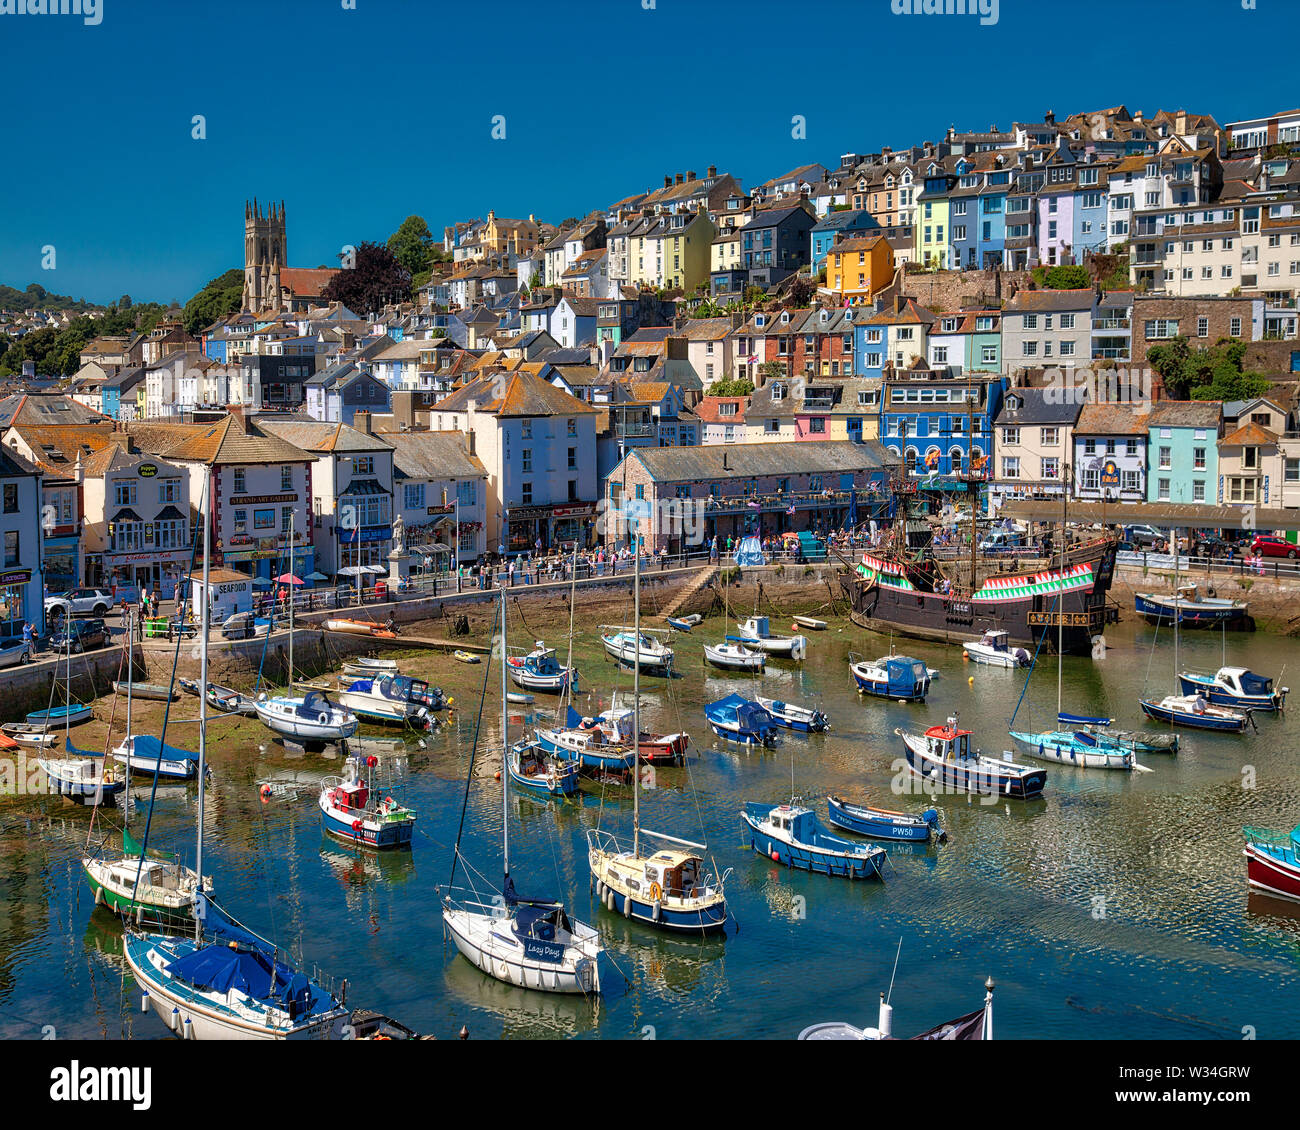 GB - DEVON: Brixham village and busy harbour area  (HDR-Image) Stock Photo